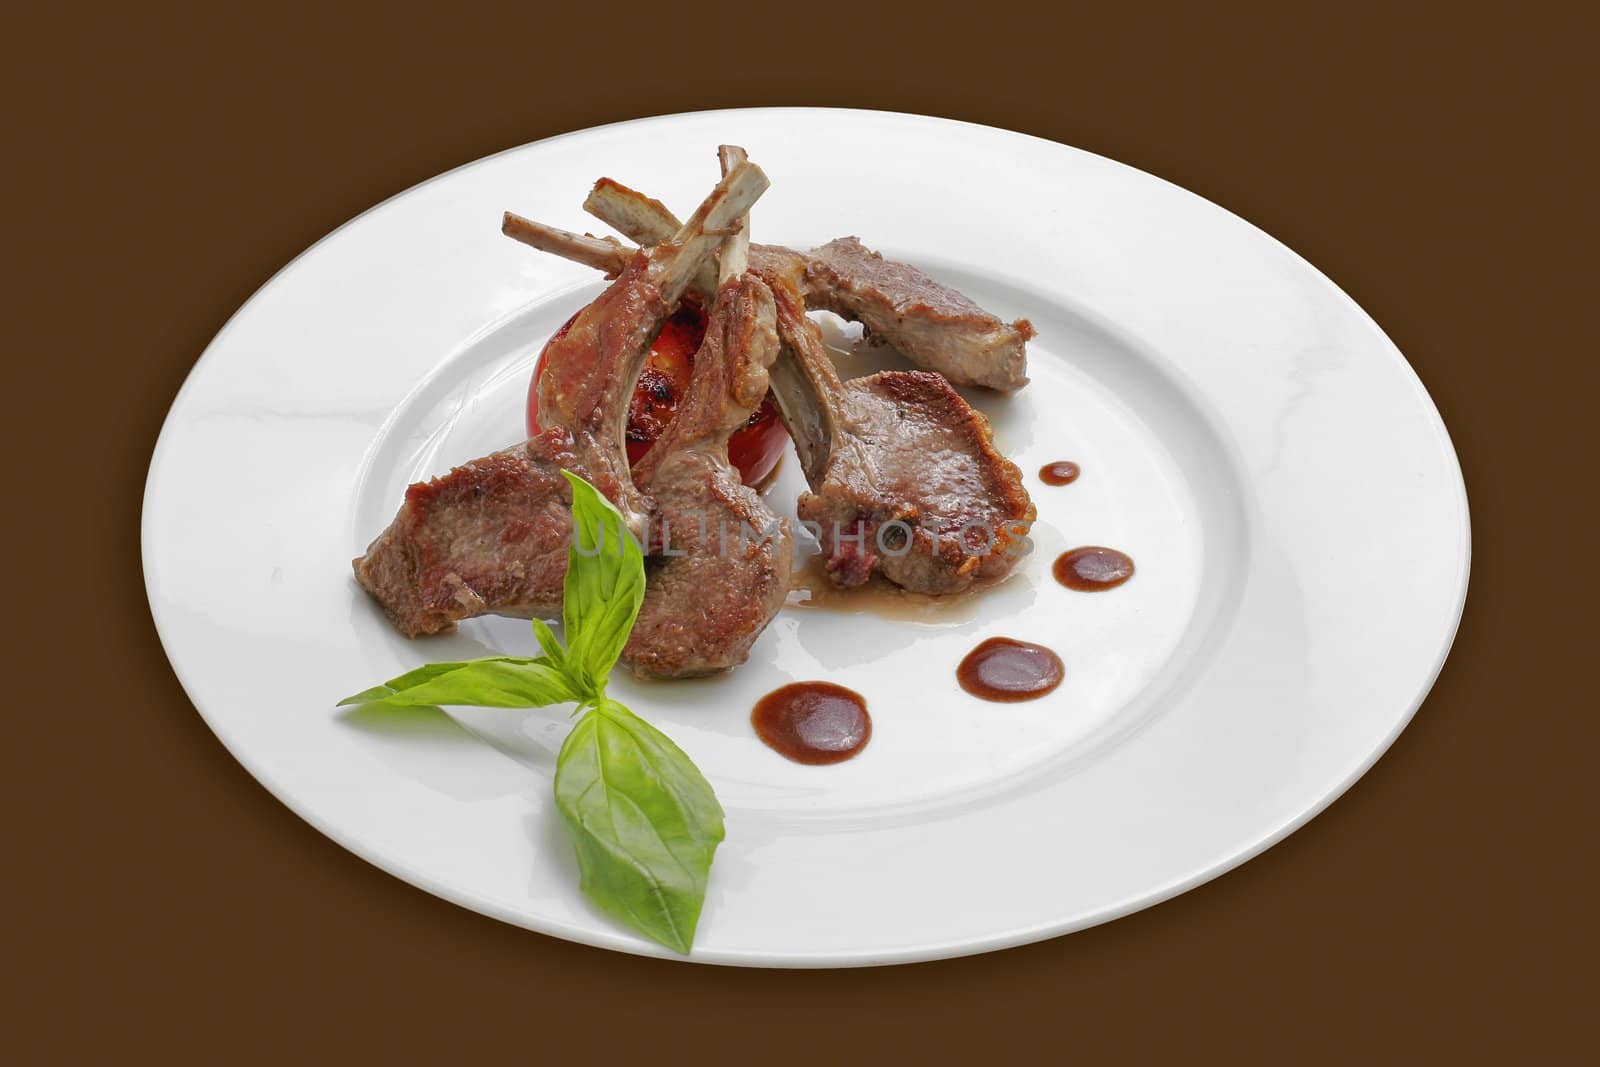 Roasted rack of lamb with a top of basil.